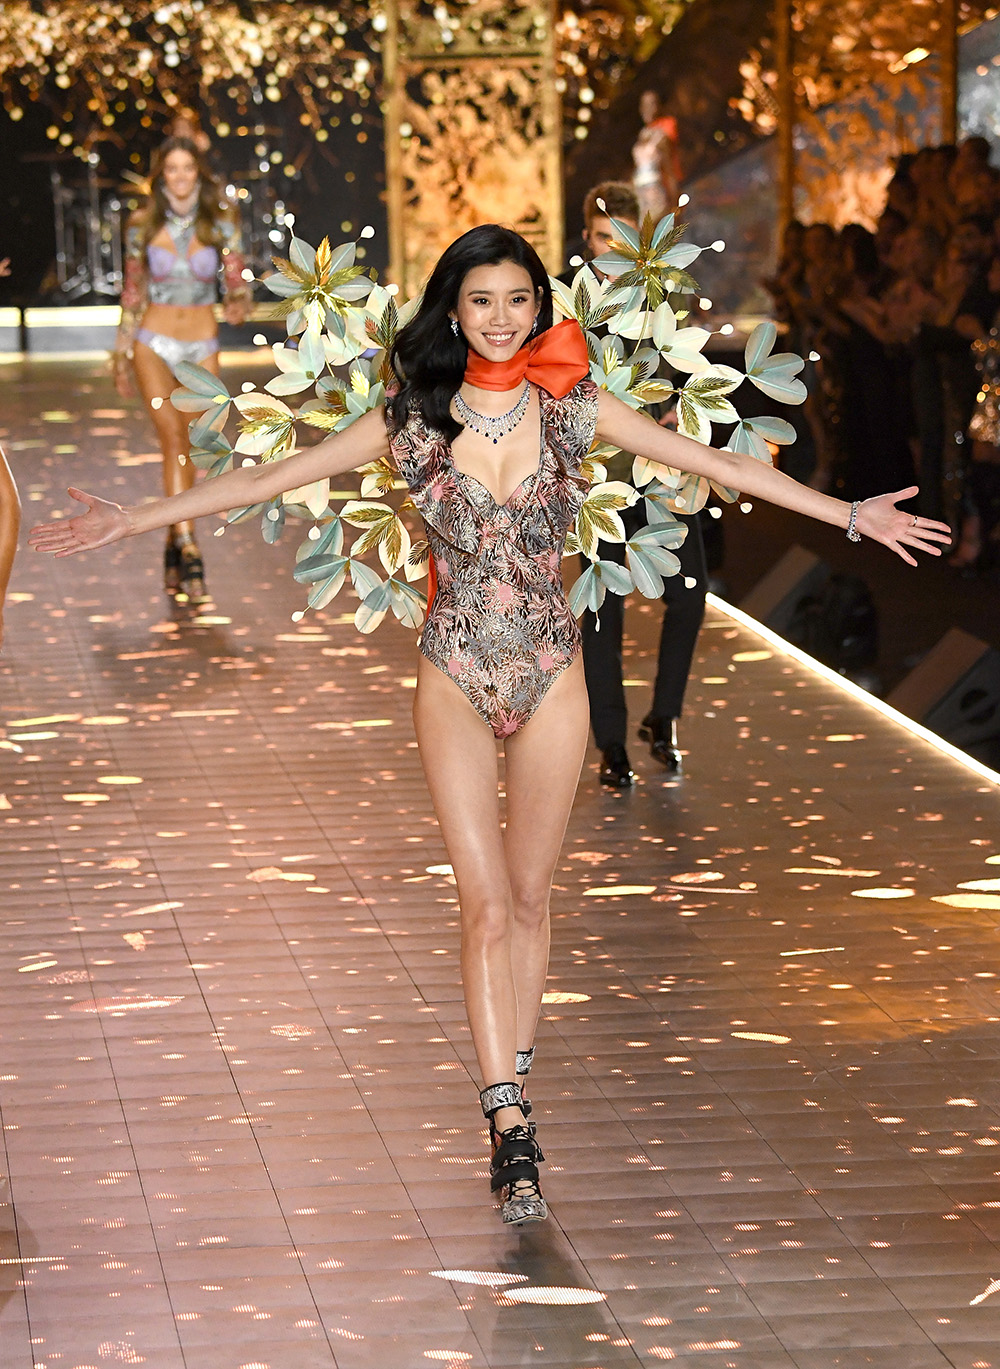 NEW YORK, NY - NOVEMBER 08: Ming Xi walks the runway during the 2018 Victoria's Secret Fashion Show at Pier 94 on November 8, 2018 in New York City. (Photo by Kevin Mazur/WireImage)